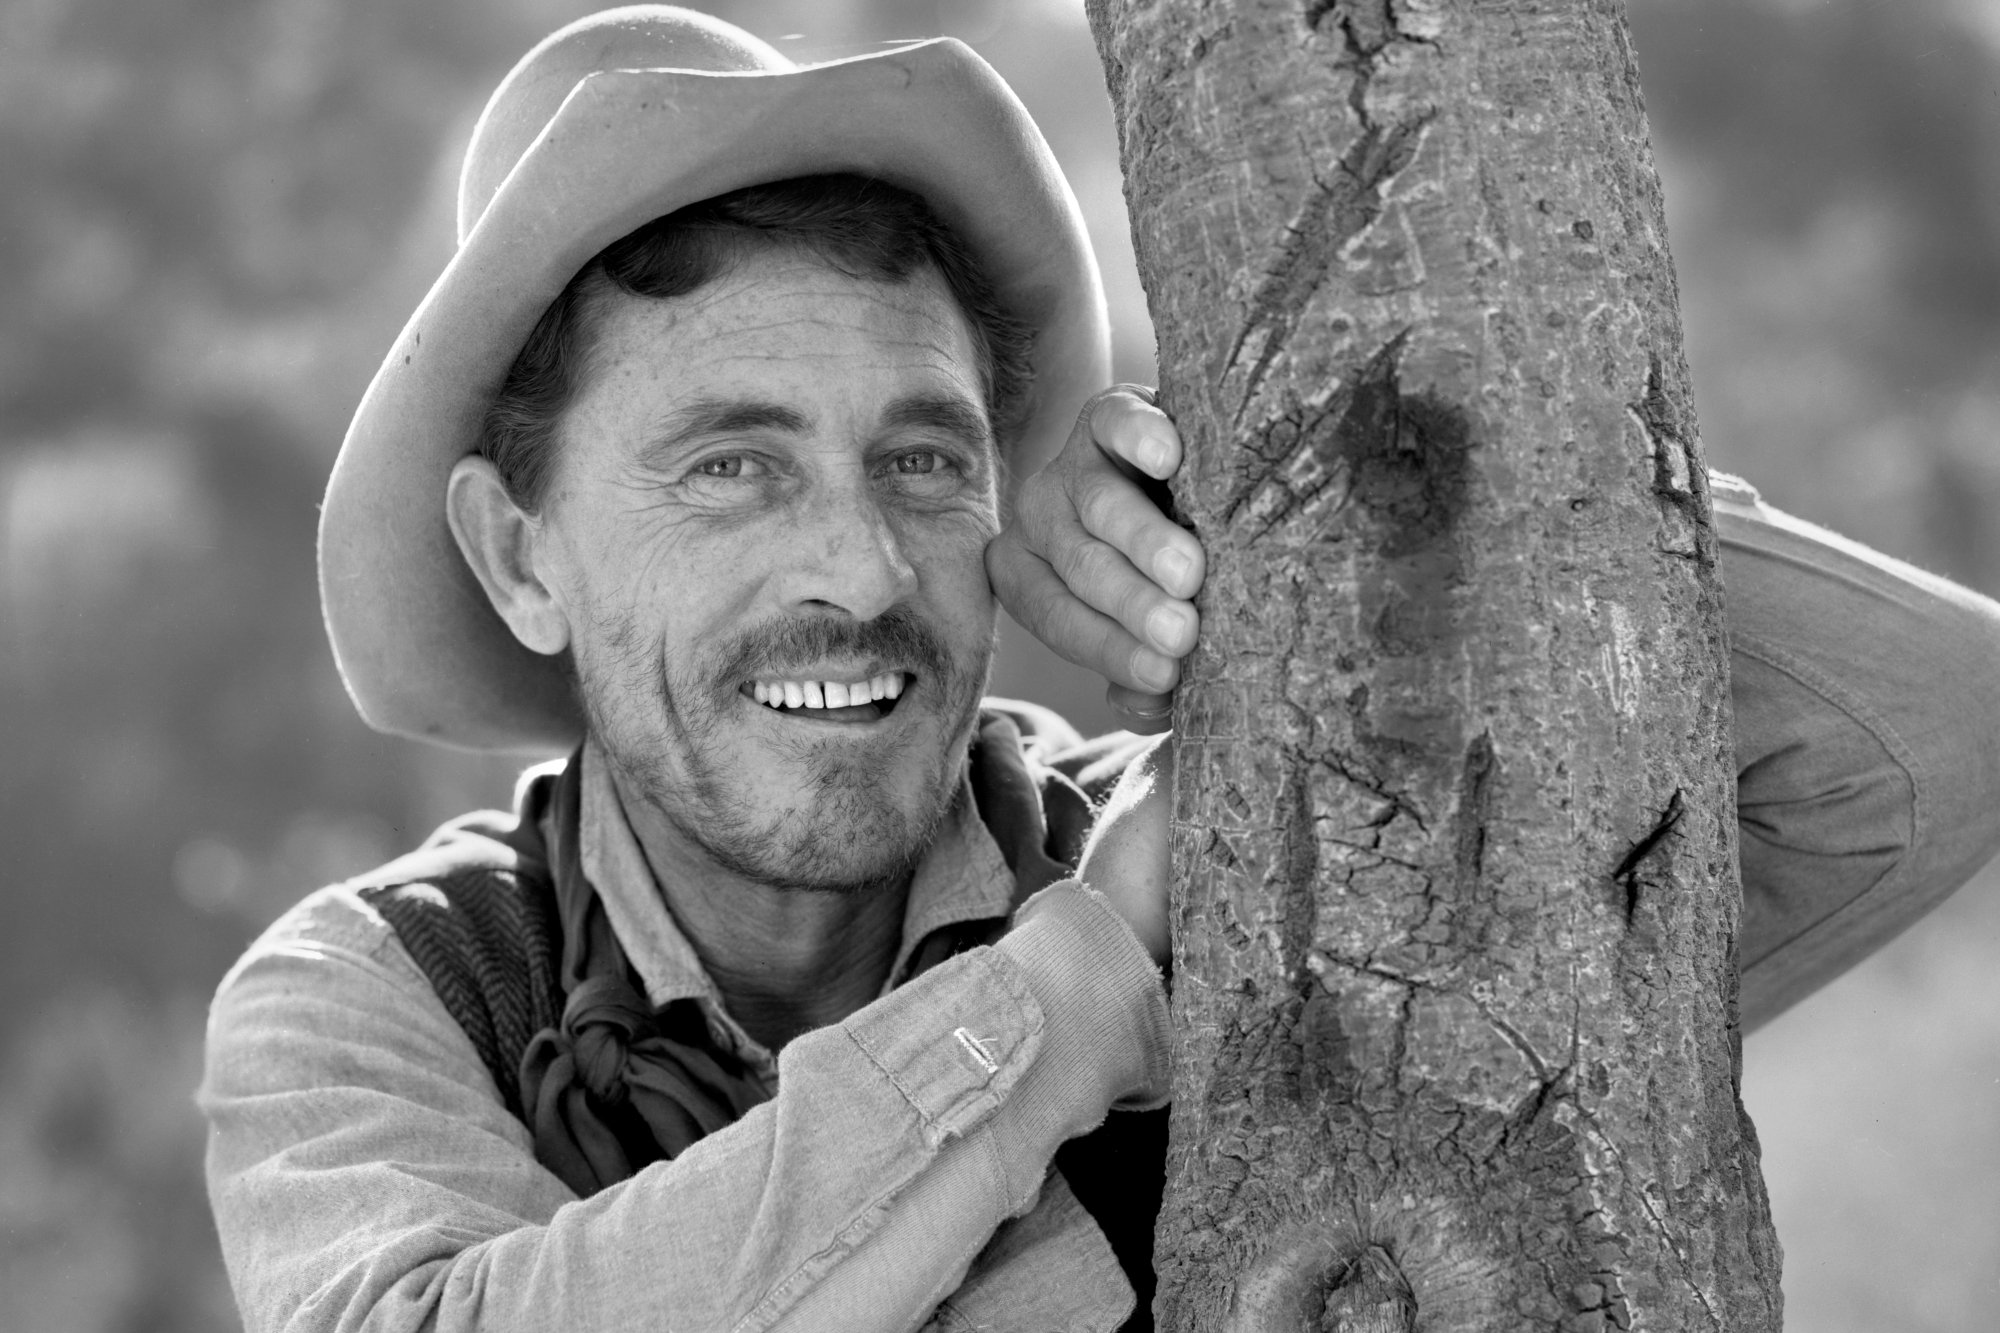 'Gunsmoke' Ken Curtis as Festus Haggen in a black-and-white picture smiling and leaning against a tree